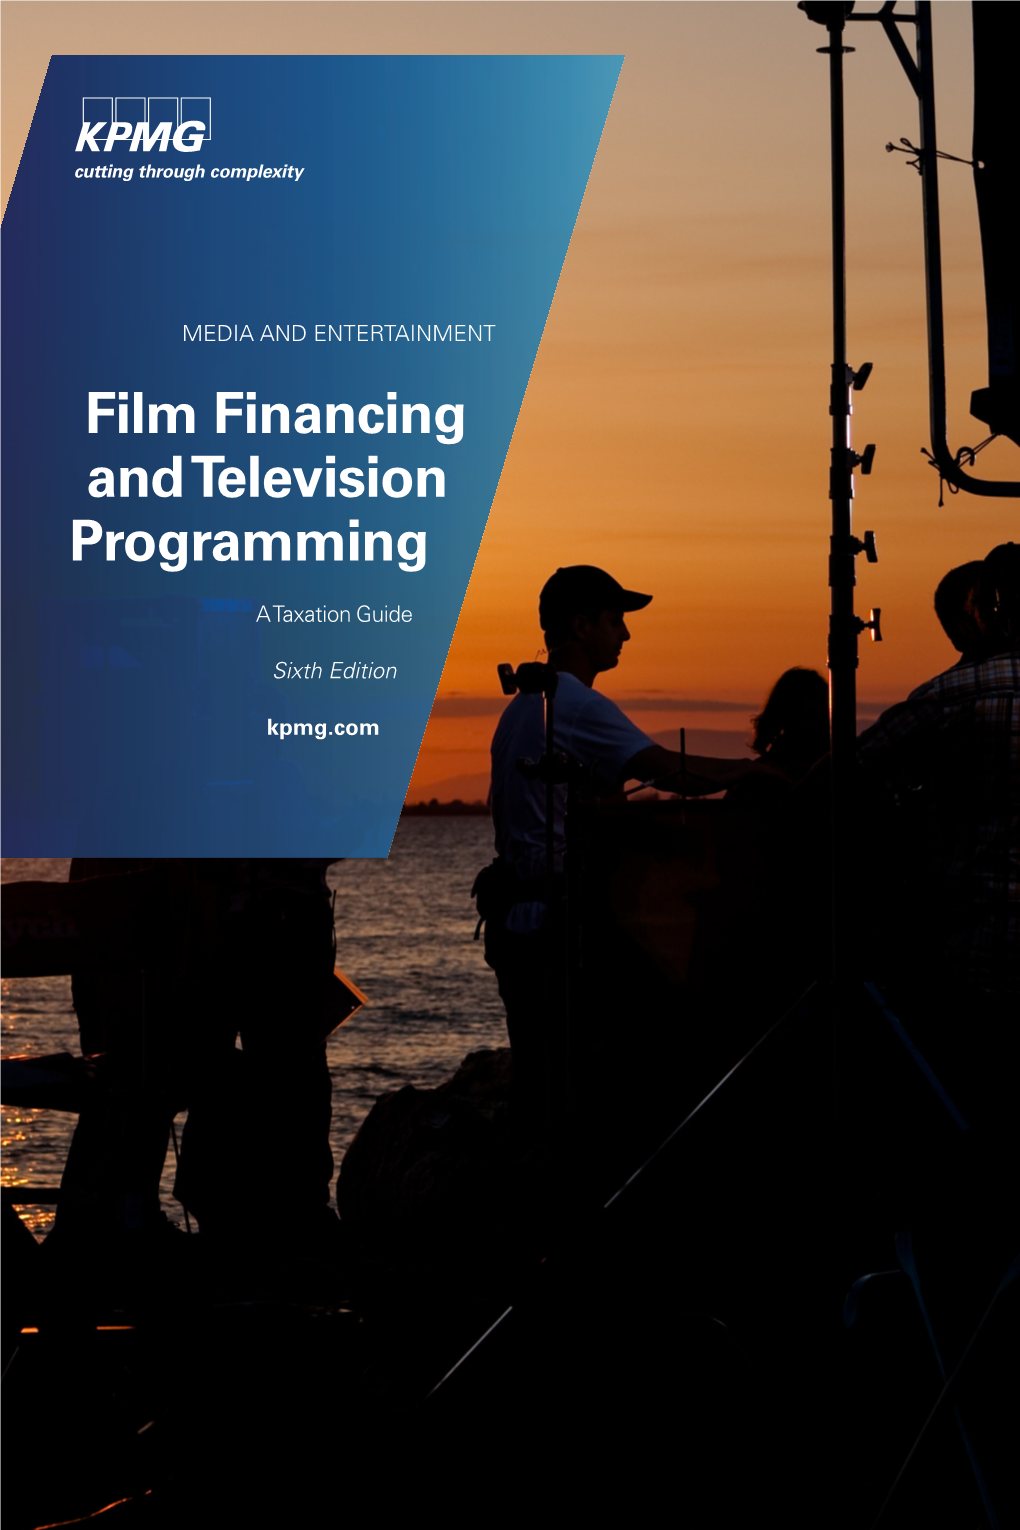 Film Financing and Television Programming